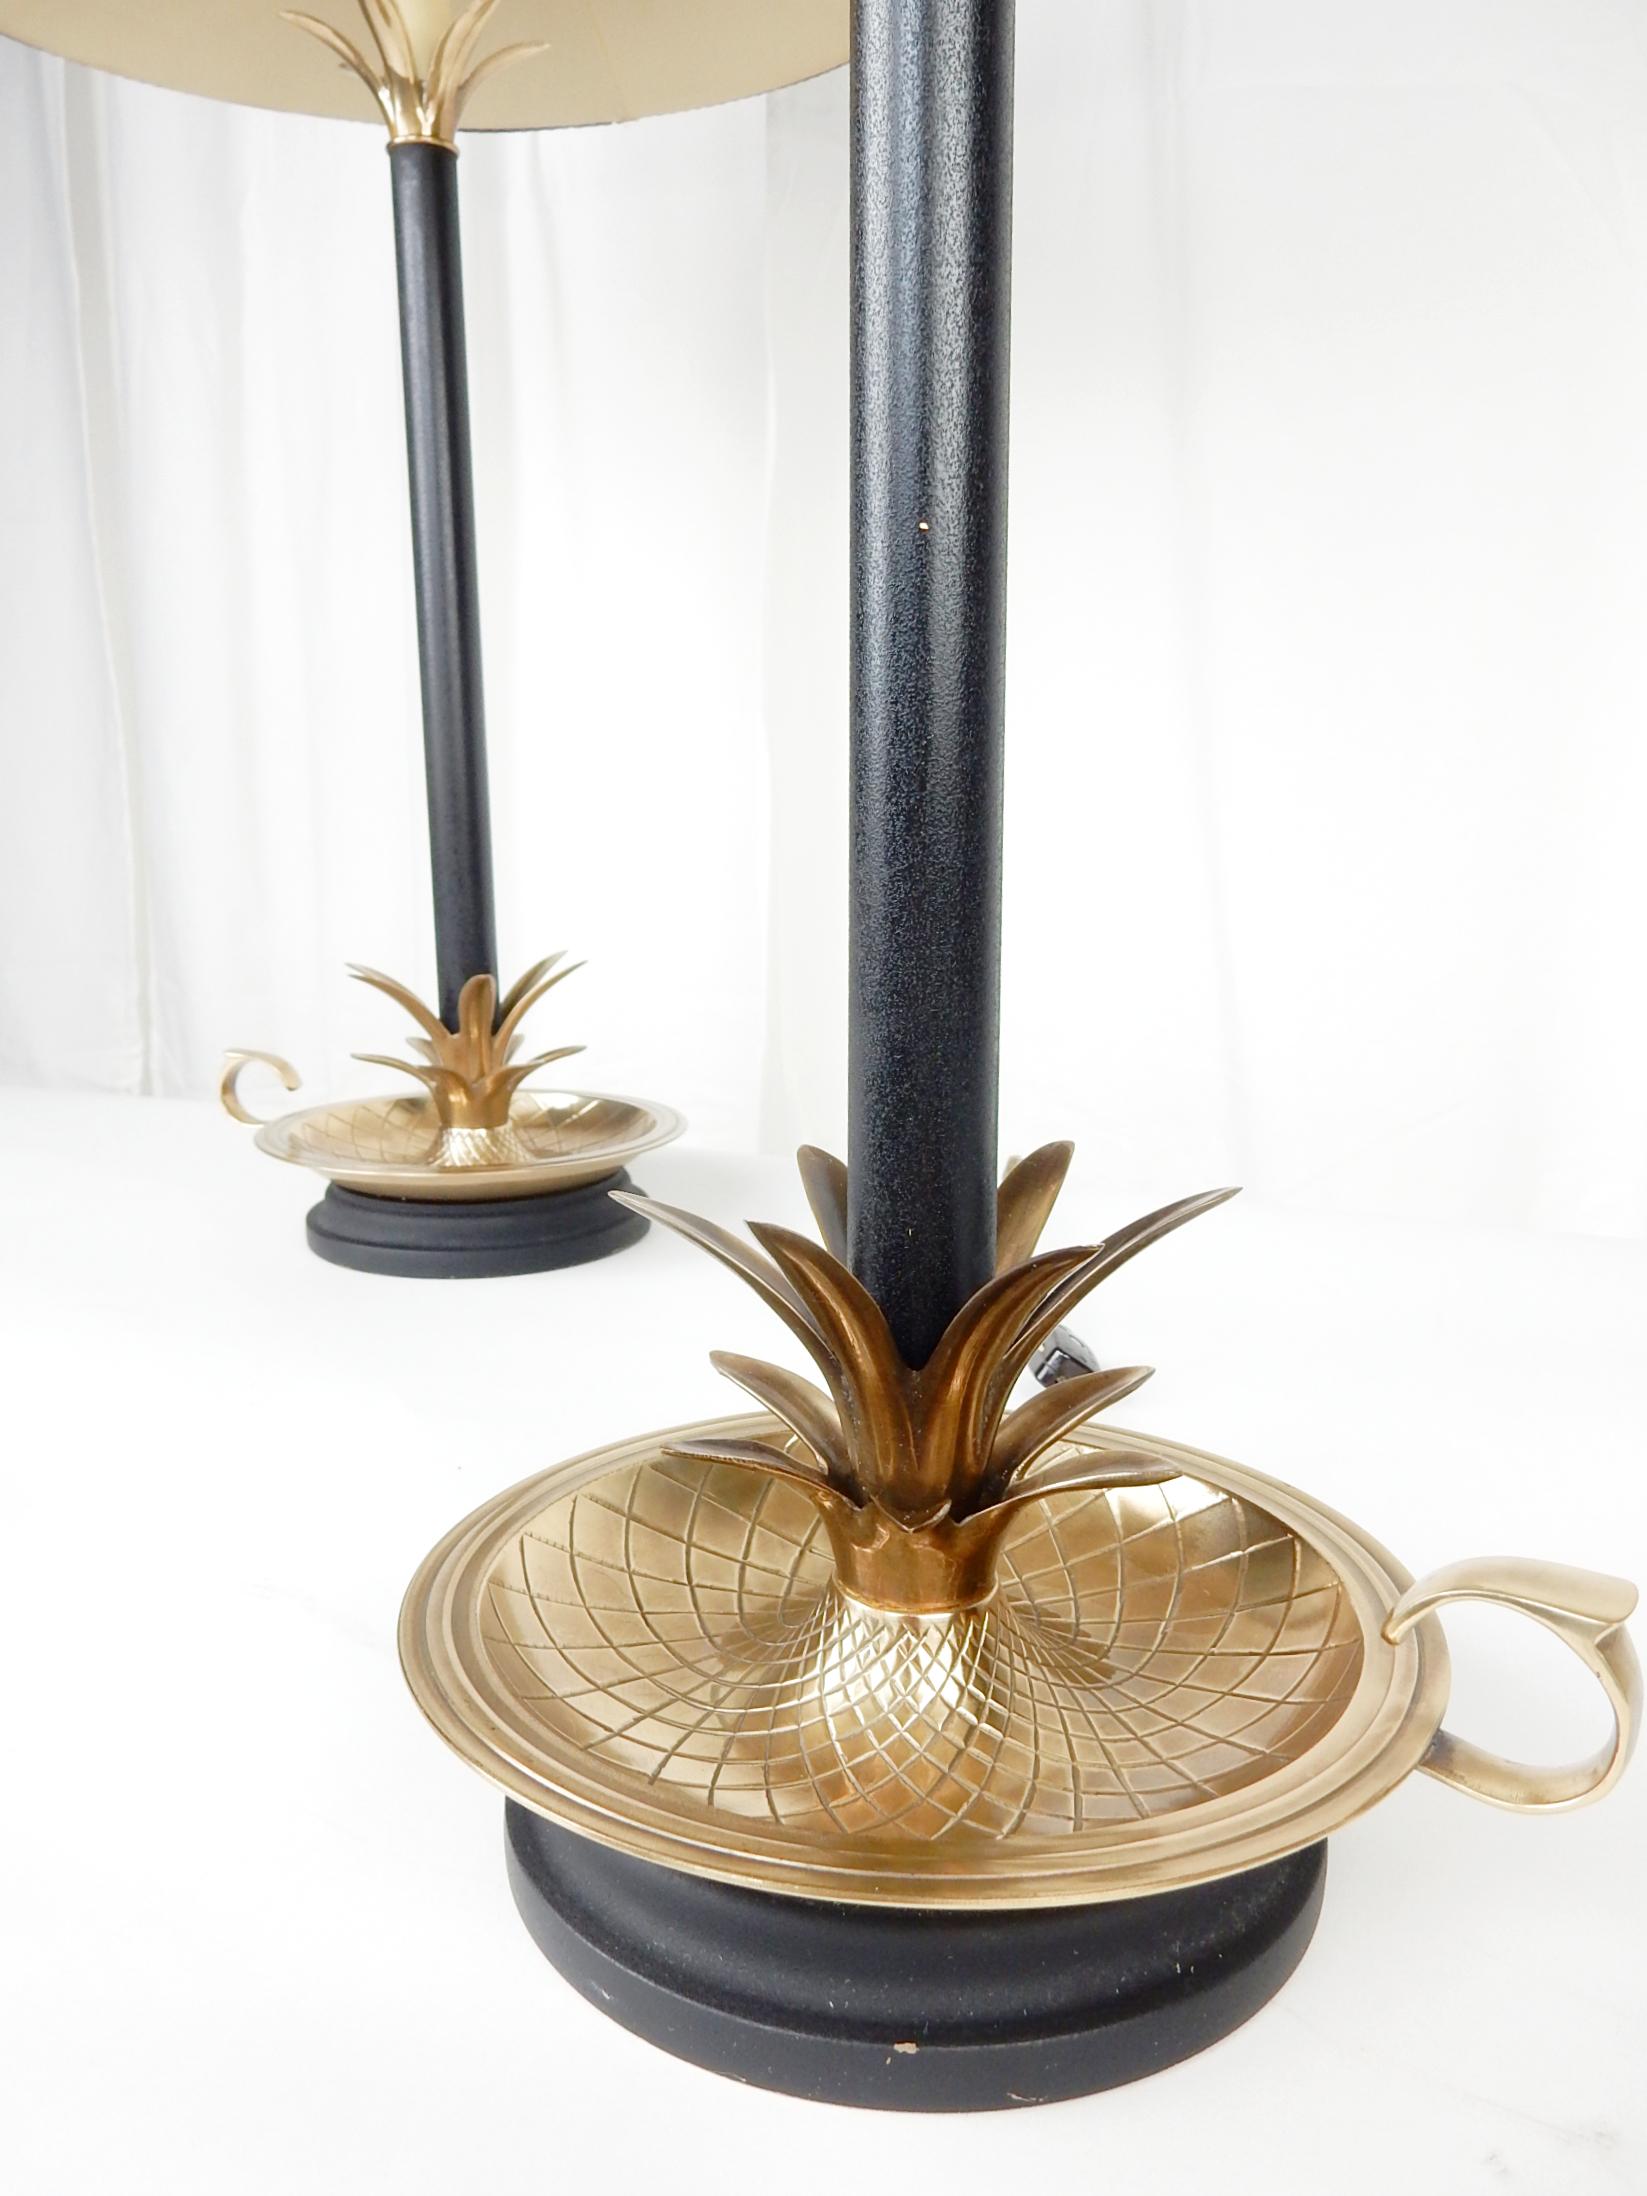 Rare pair of brass pineapple table lamps by Frederick Cooper of Chicago circa 1970s.
This pair is in excellent condition including their original cloth shades.
Both in perfect working condition.